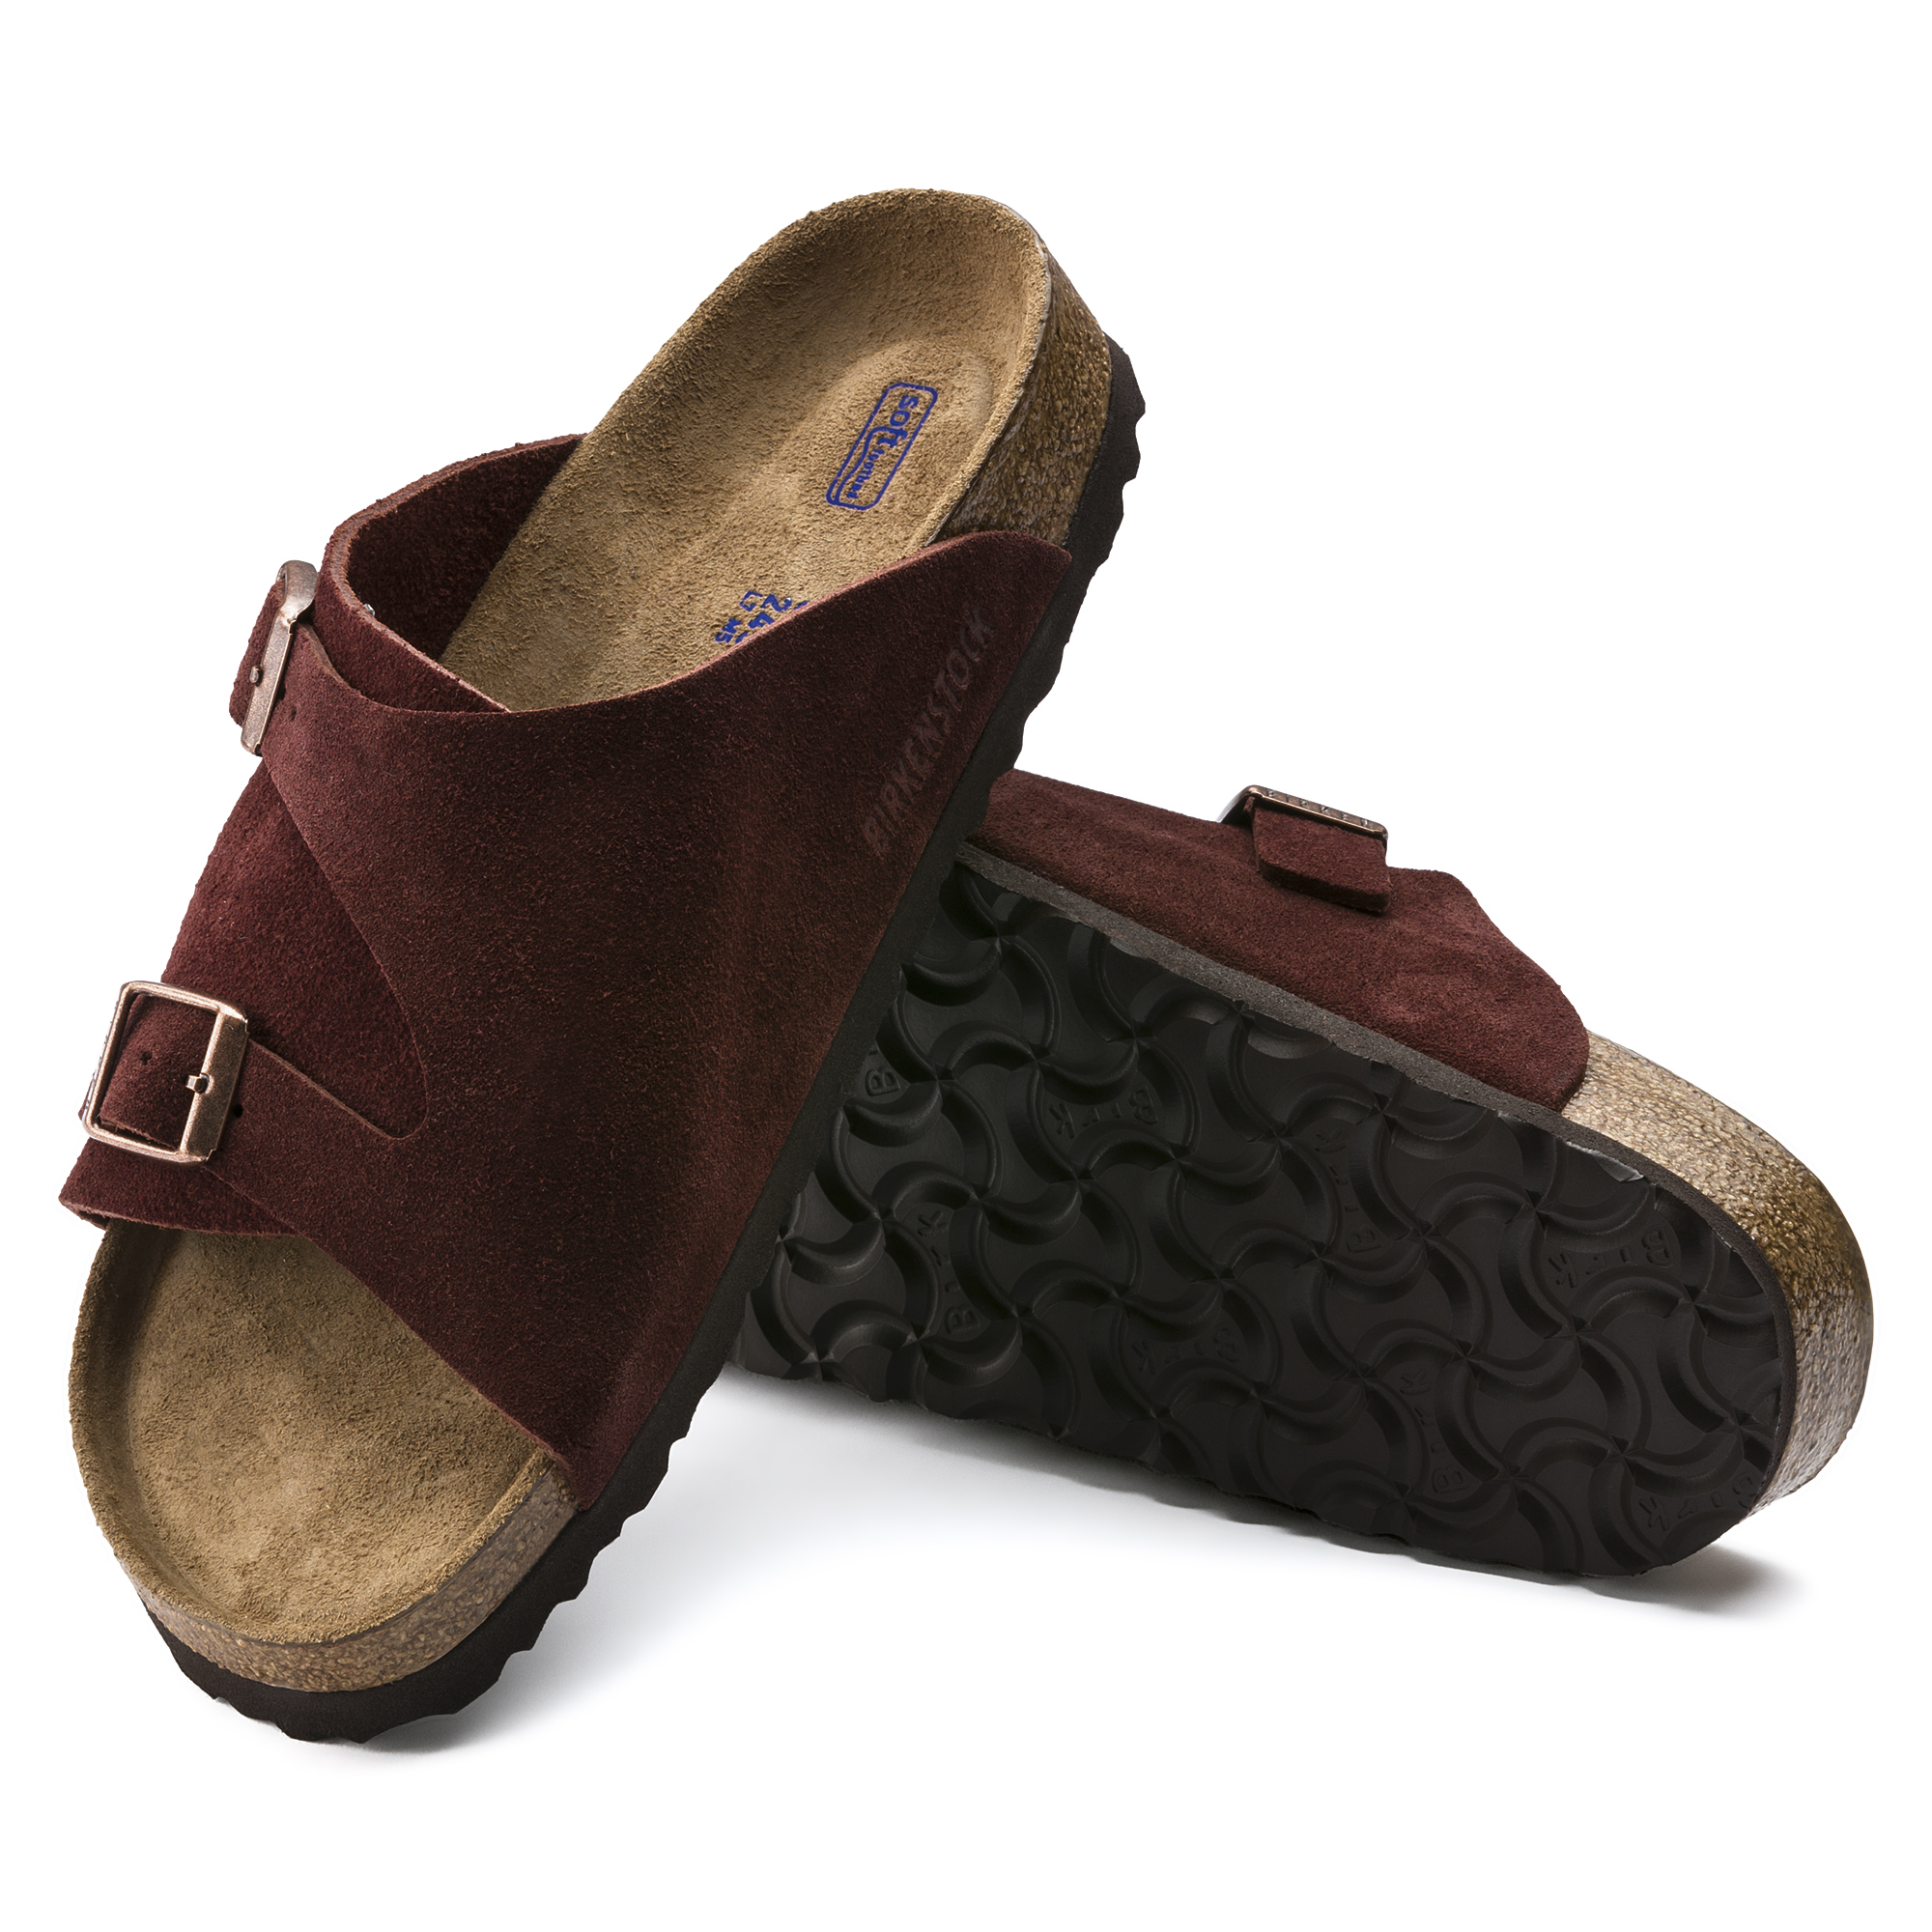 Zürich Suede Leather Soft Footbed Port